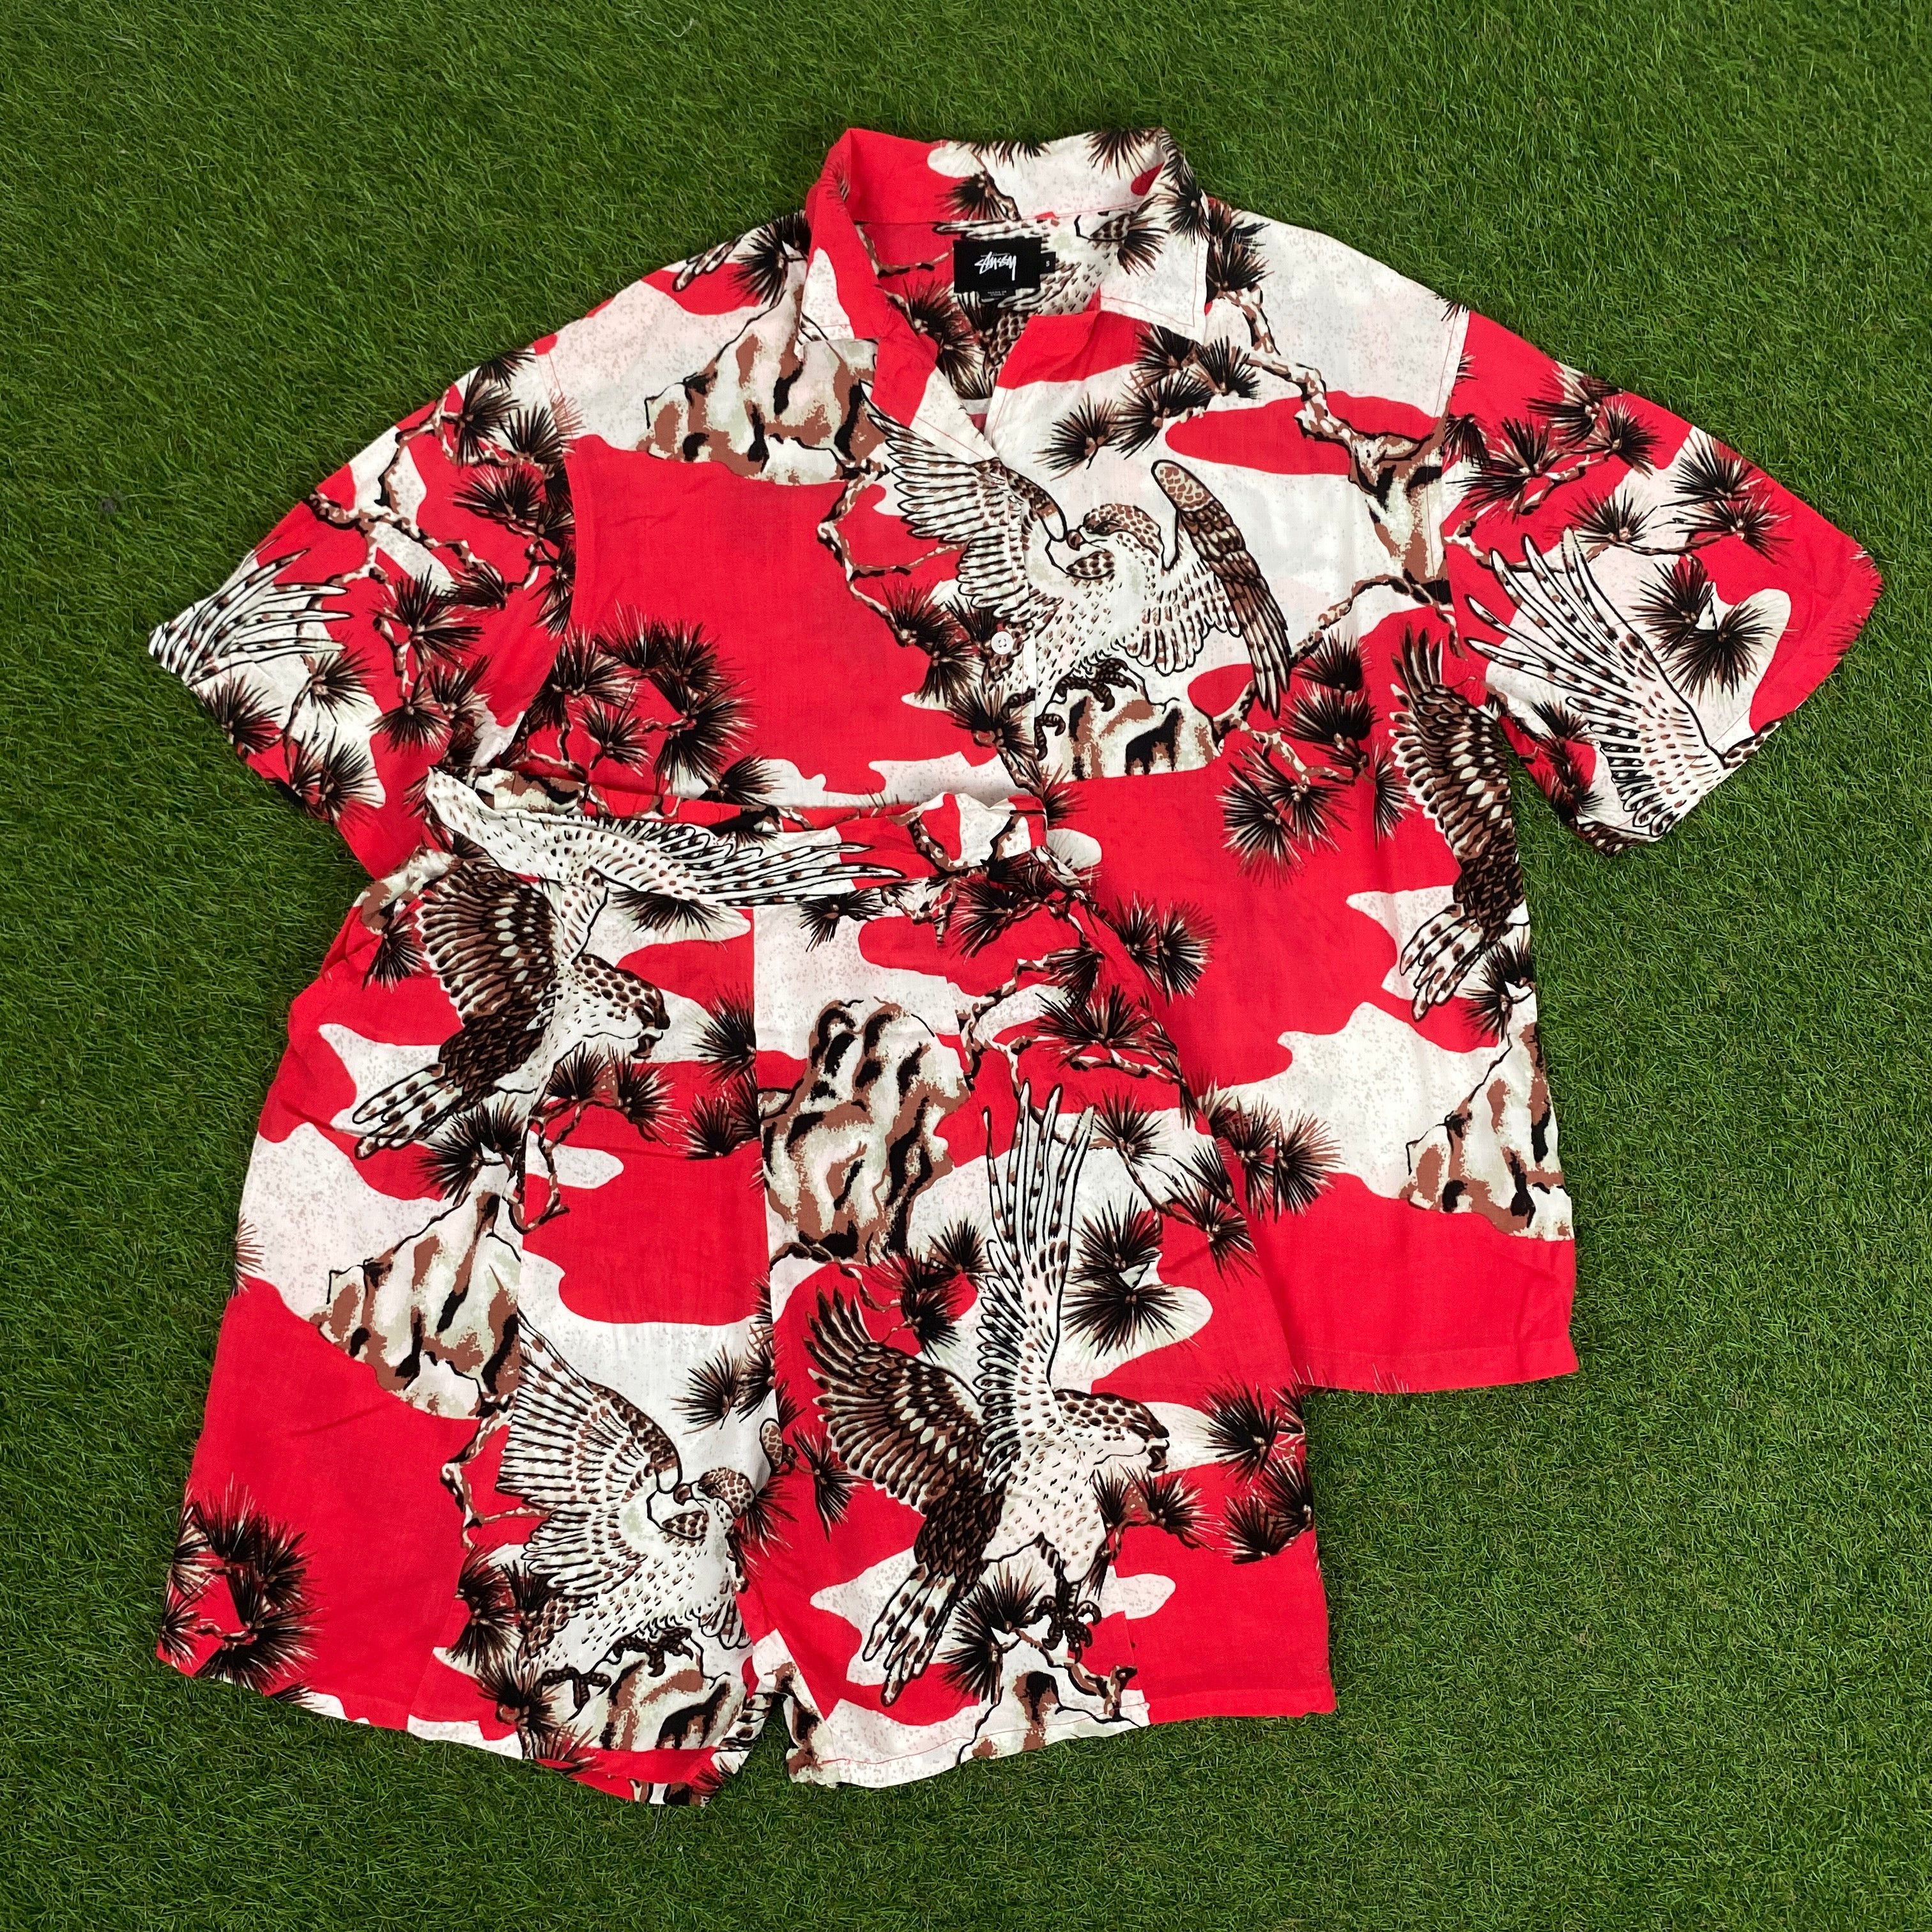 Retro Stussy Button Up T-Shirt & Shorts Set Red Small